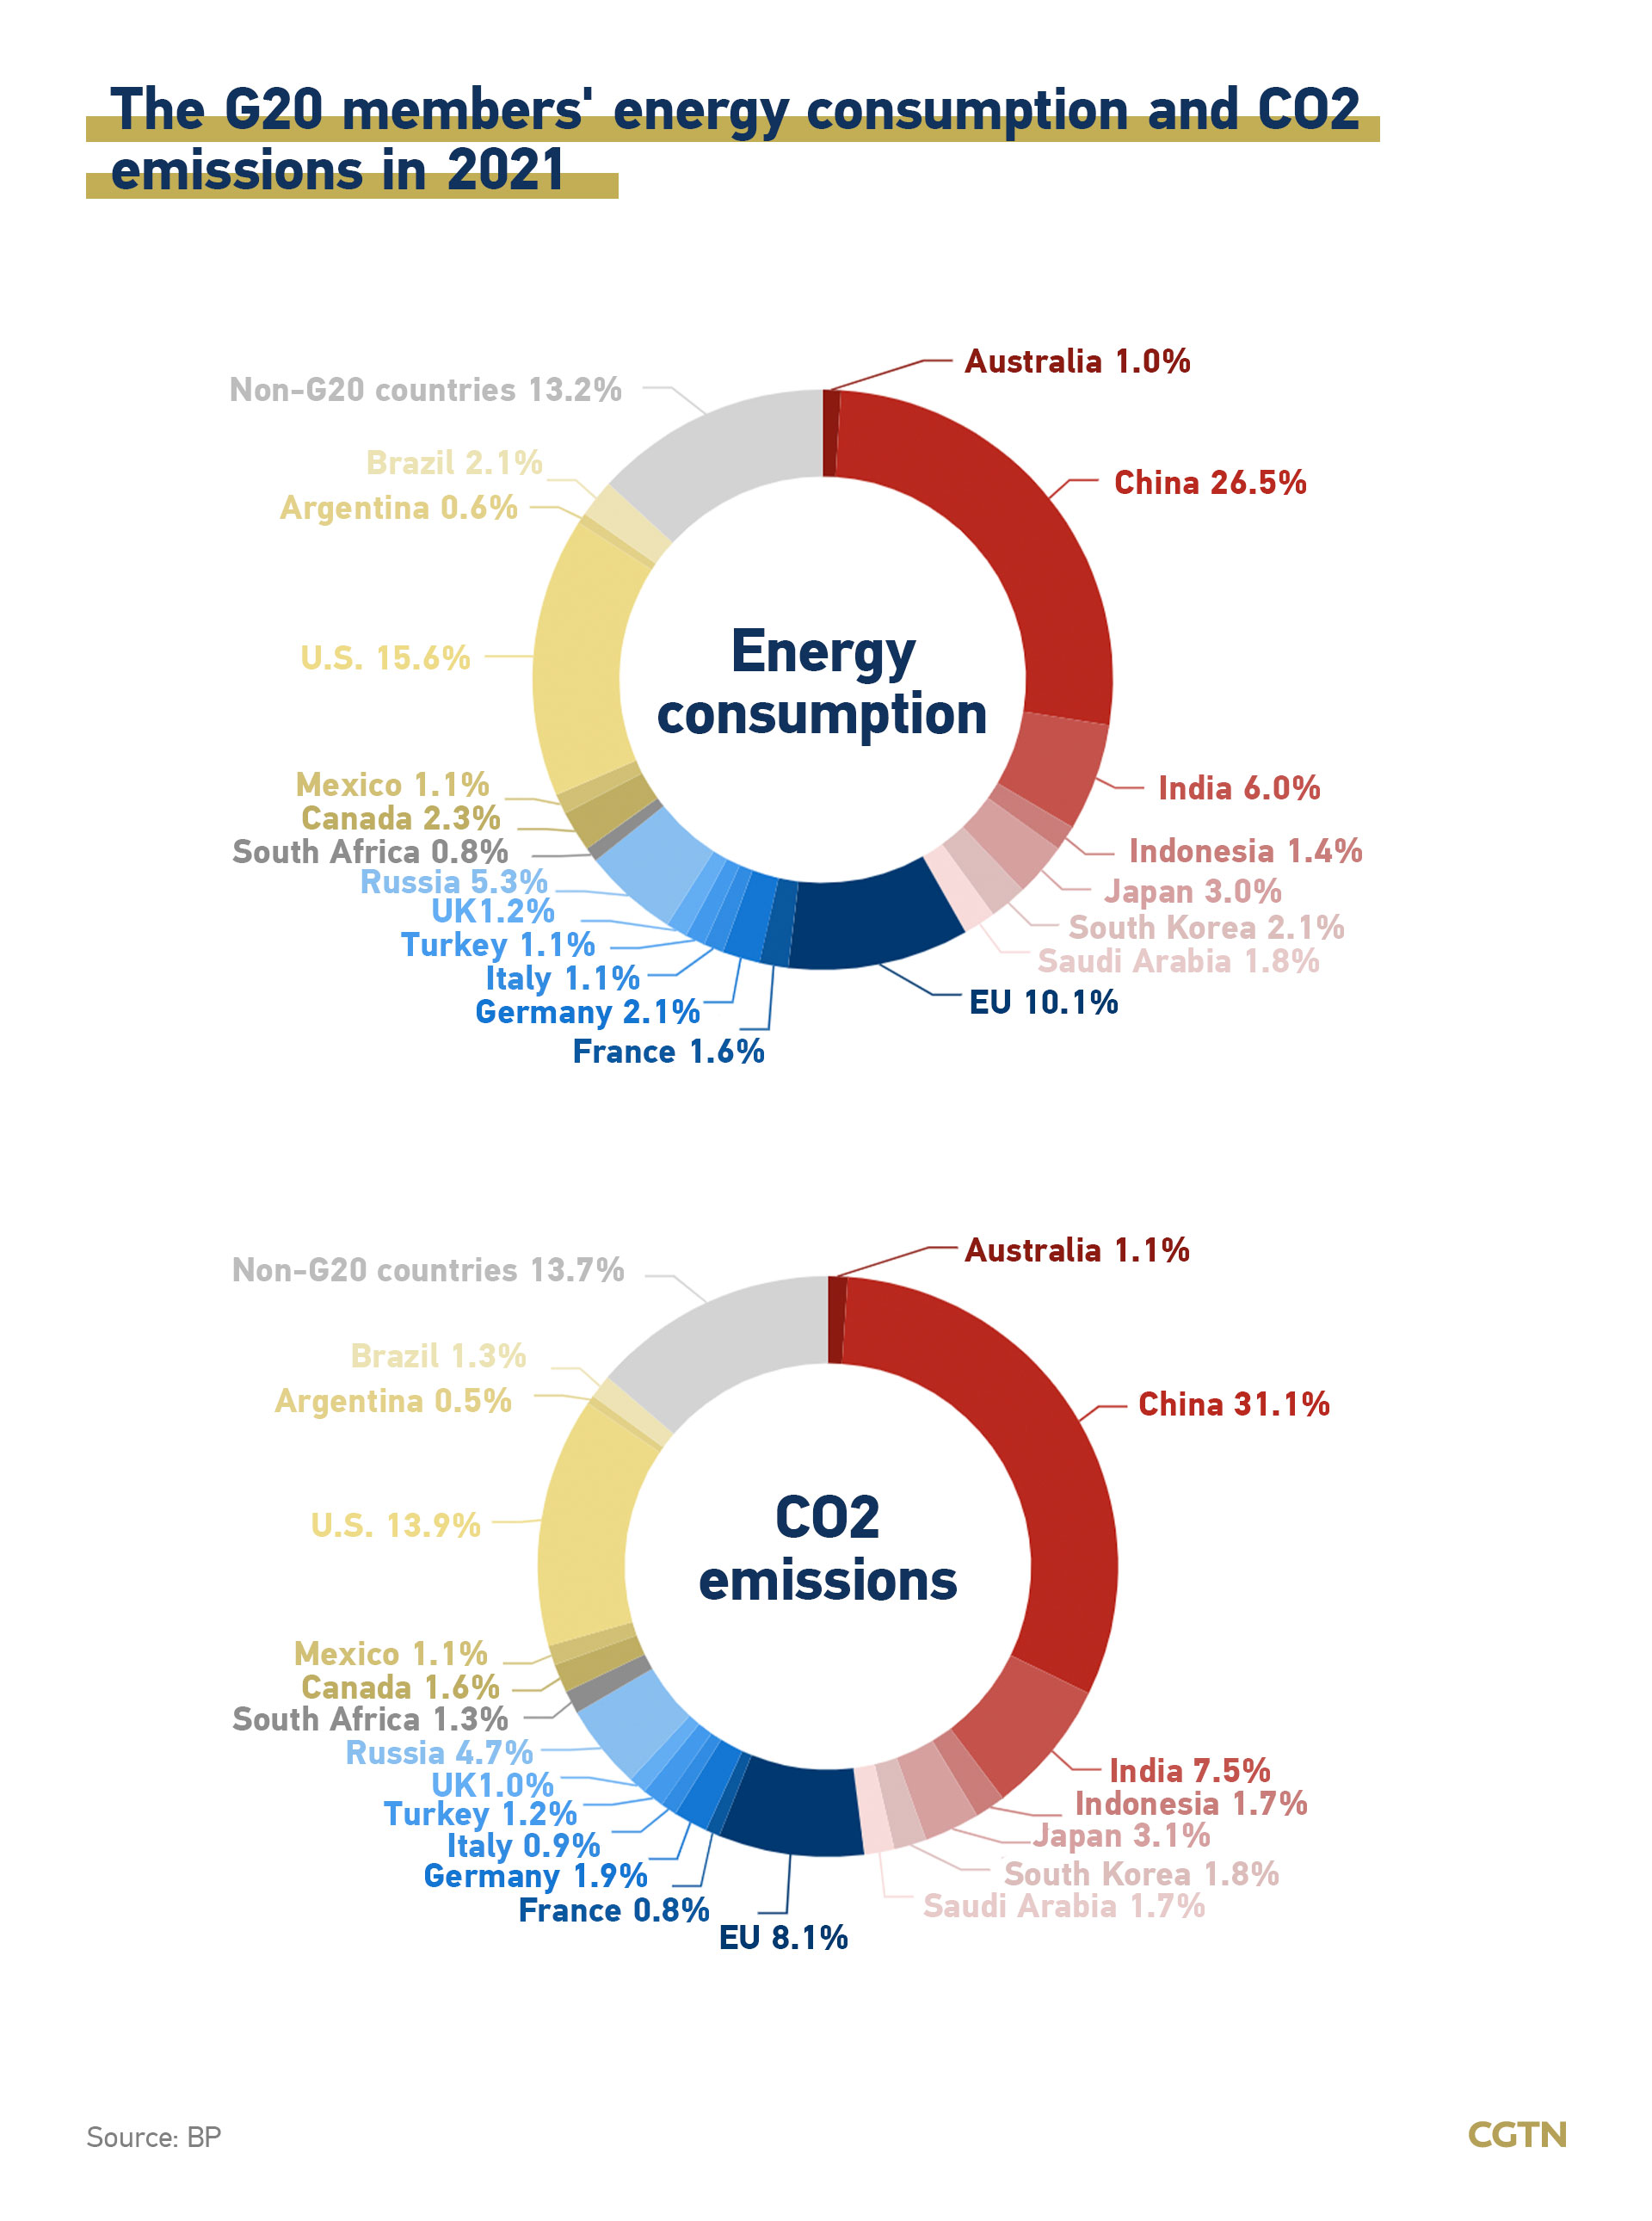 How G20's energy mix evolved over the last 50 years